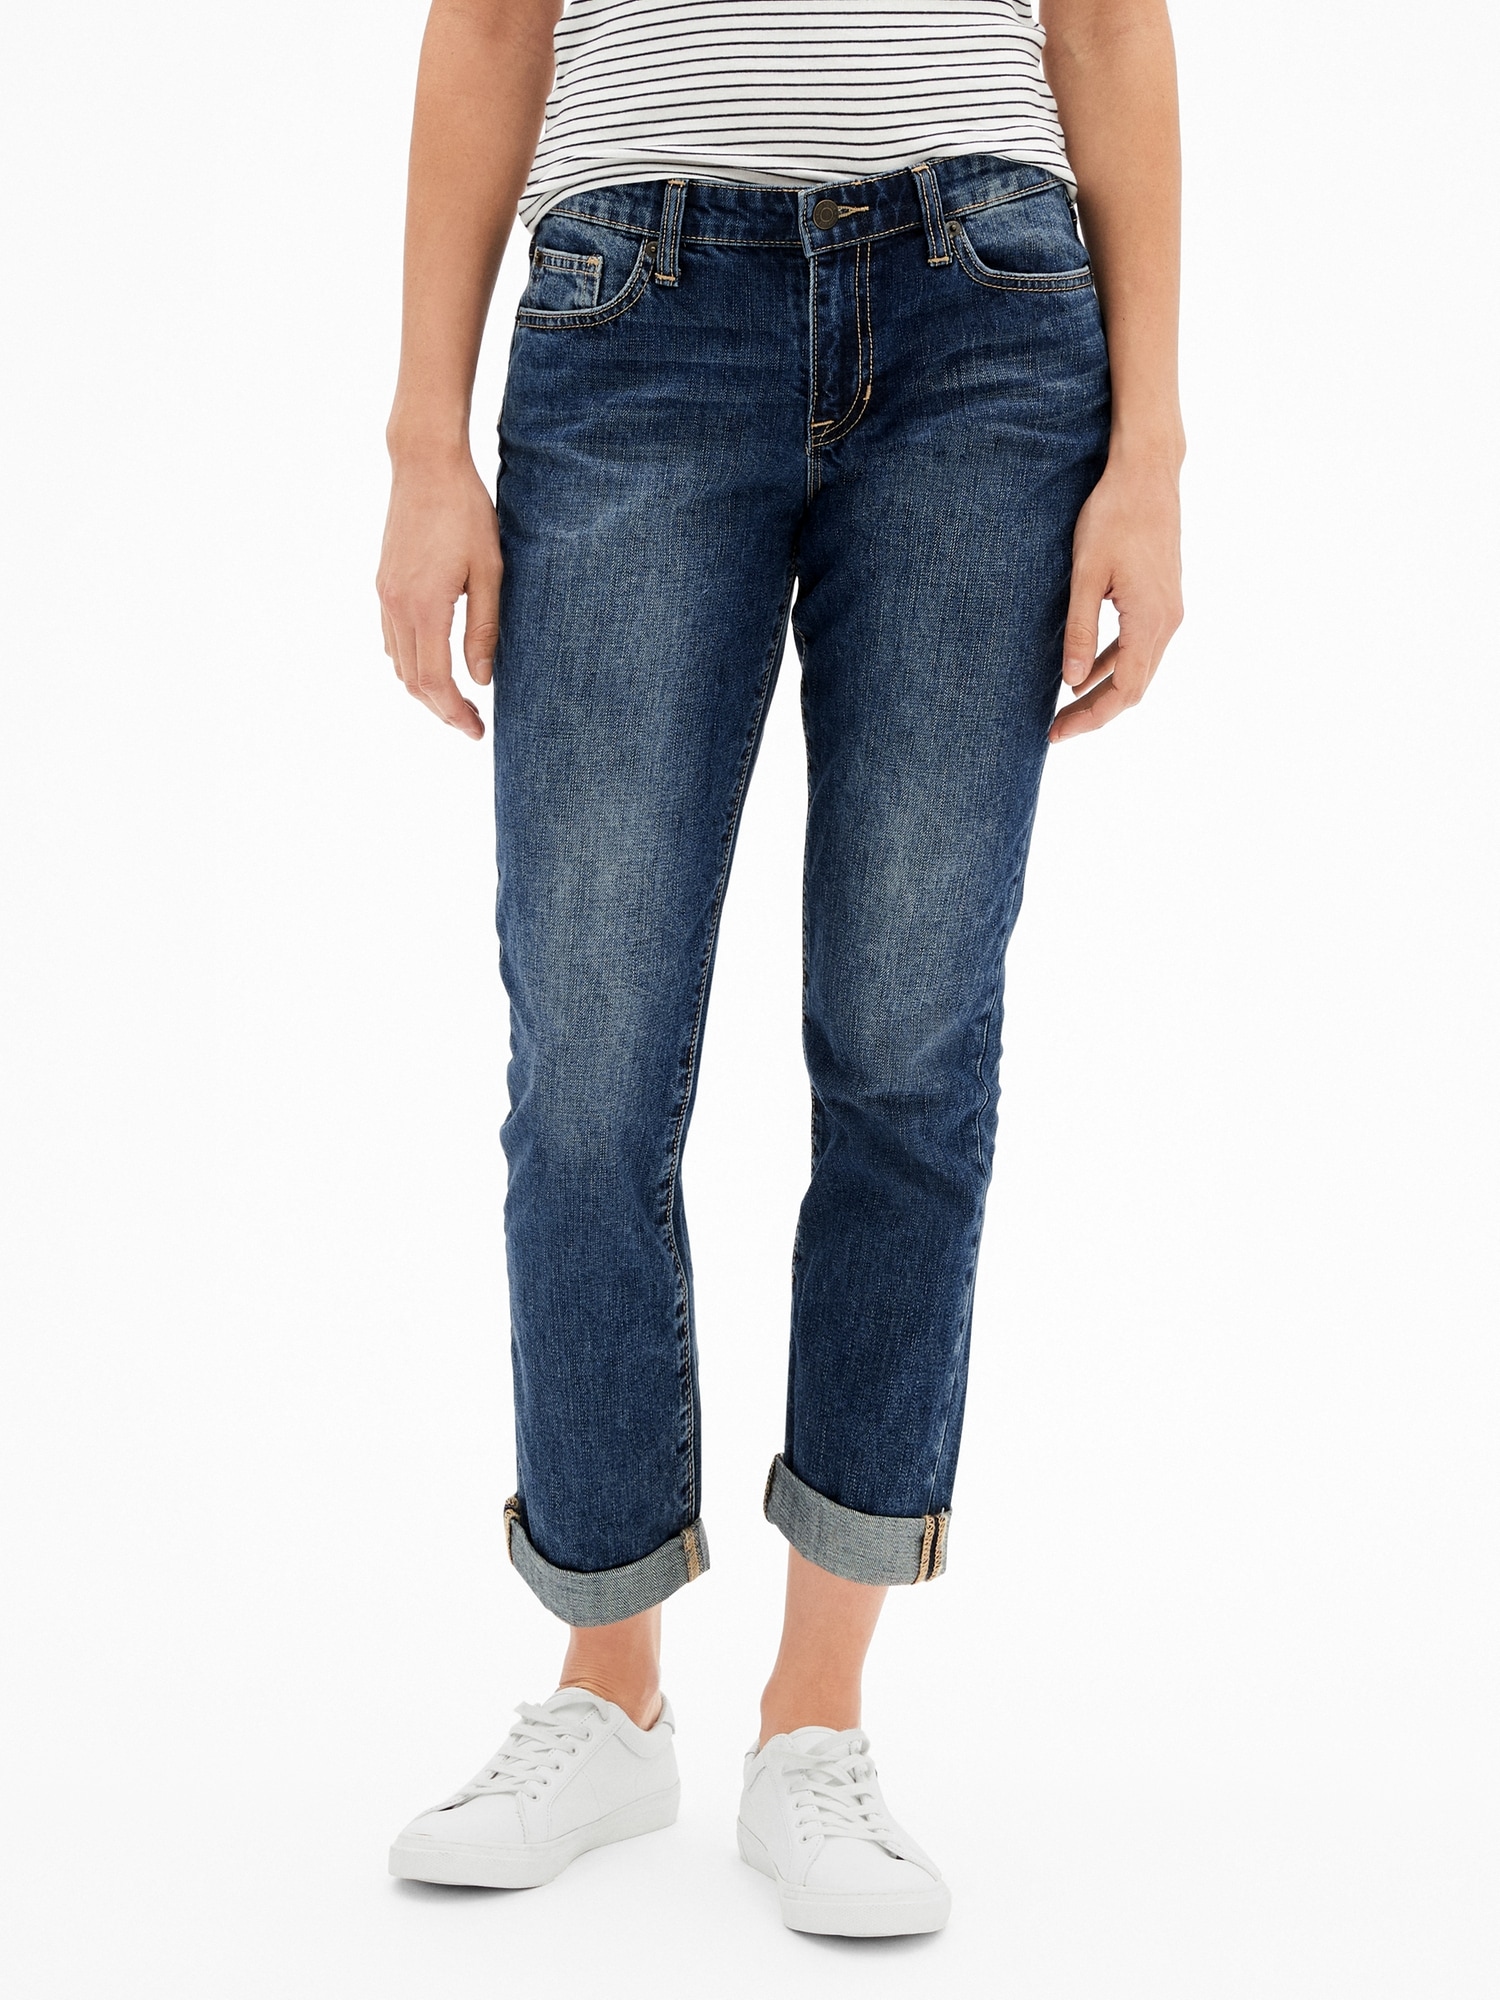 Gap Factory Mid Rise Distressed Universal Slim Boyfriend Jeans with Washwell  - ShopStyle